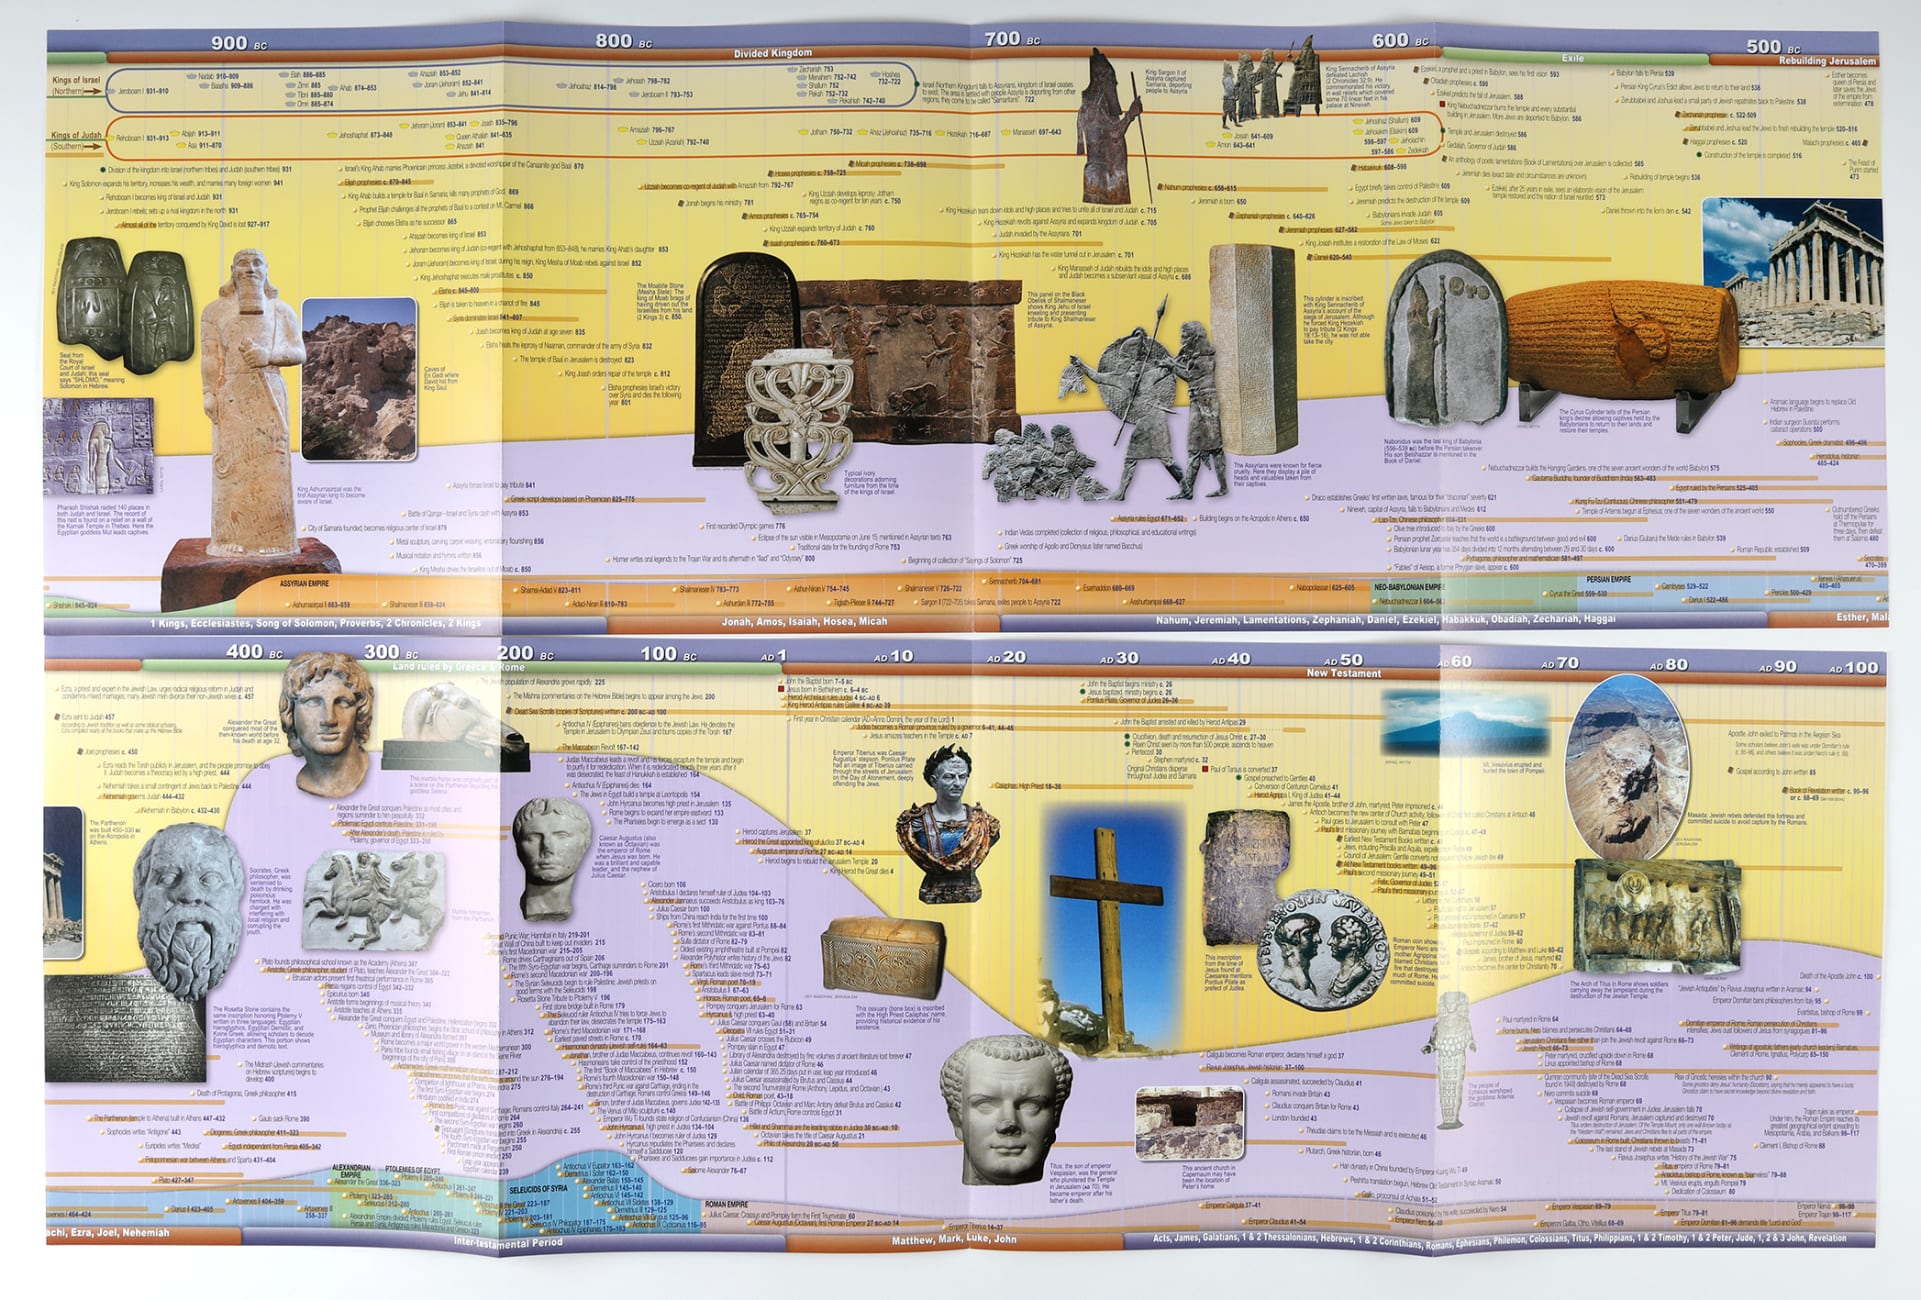 10-Foot Bible & World History Time Line Chart/card